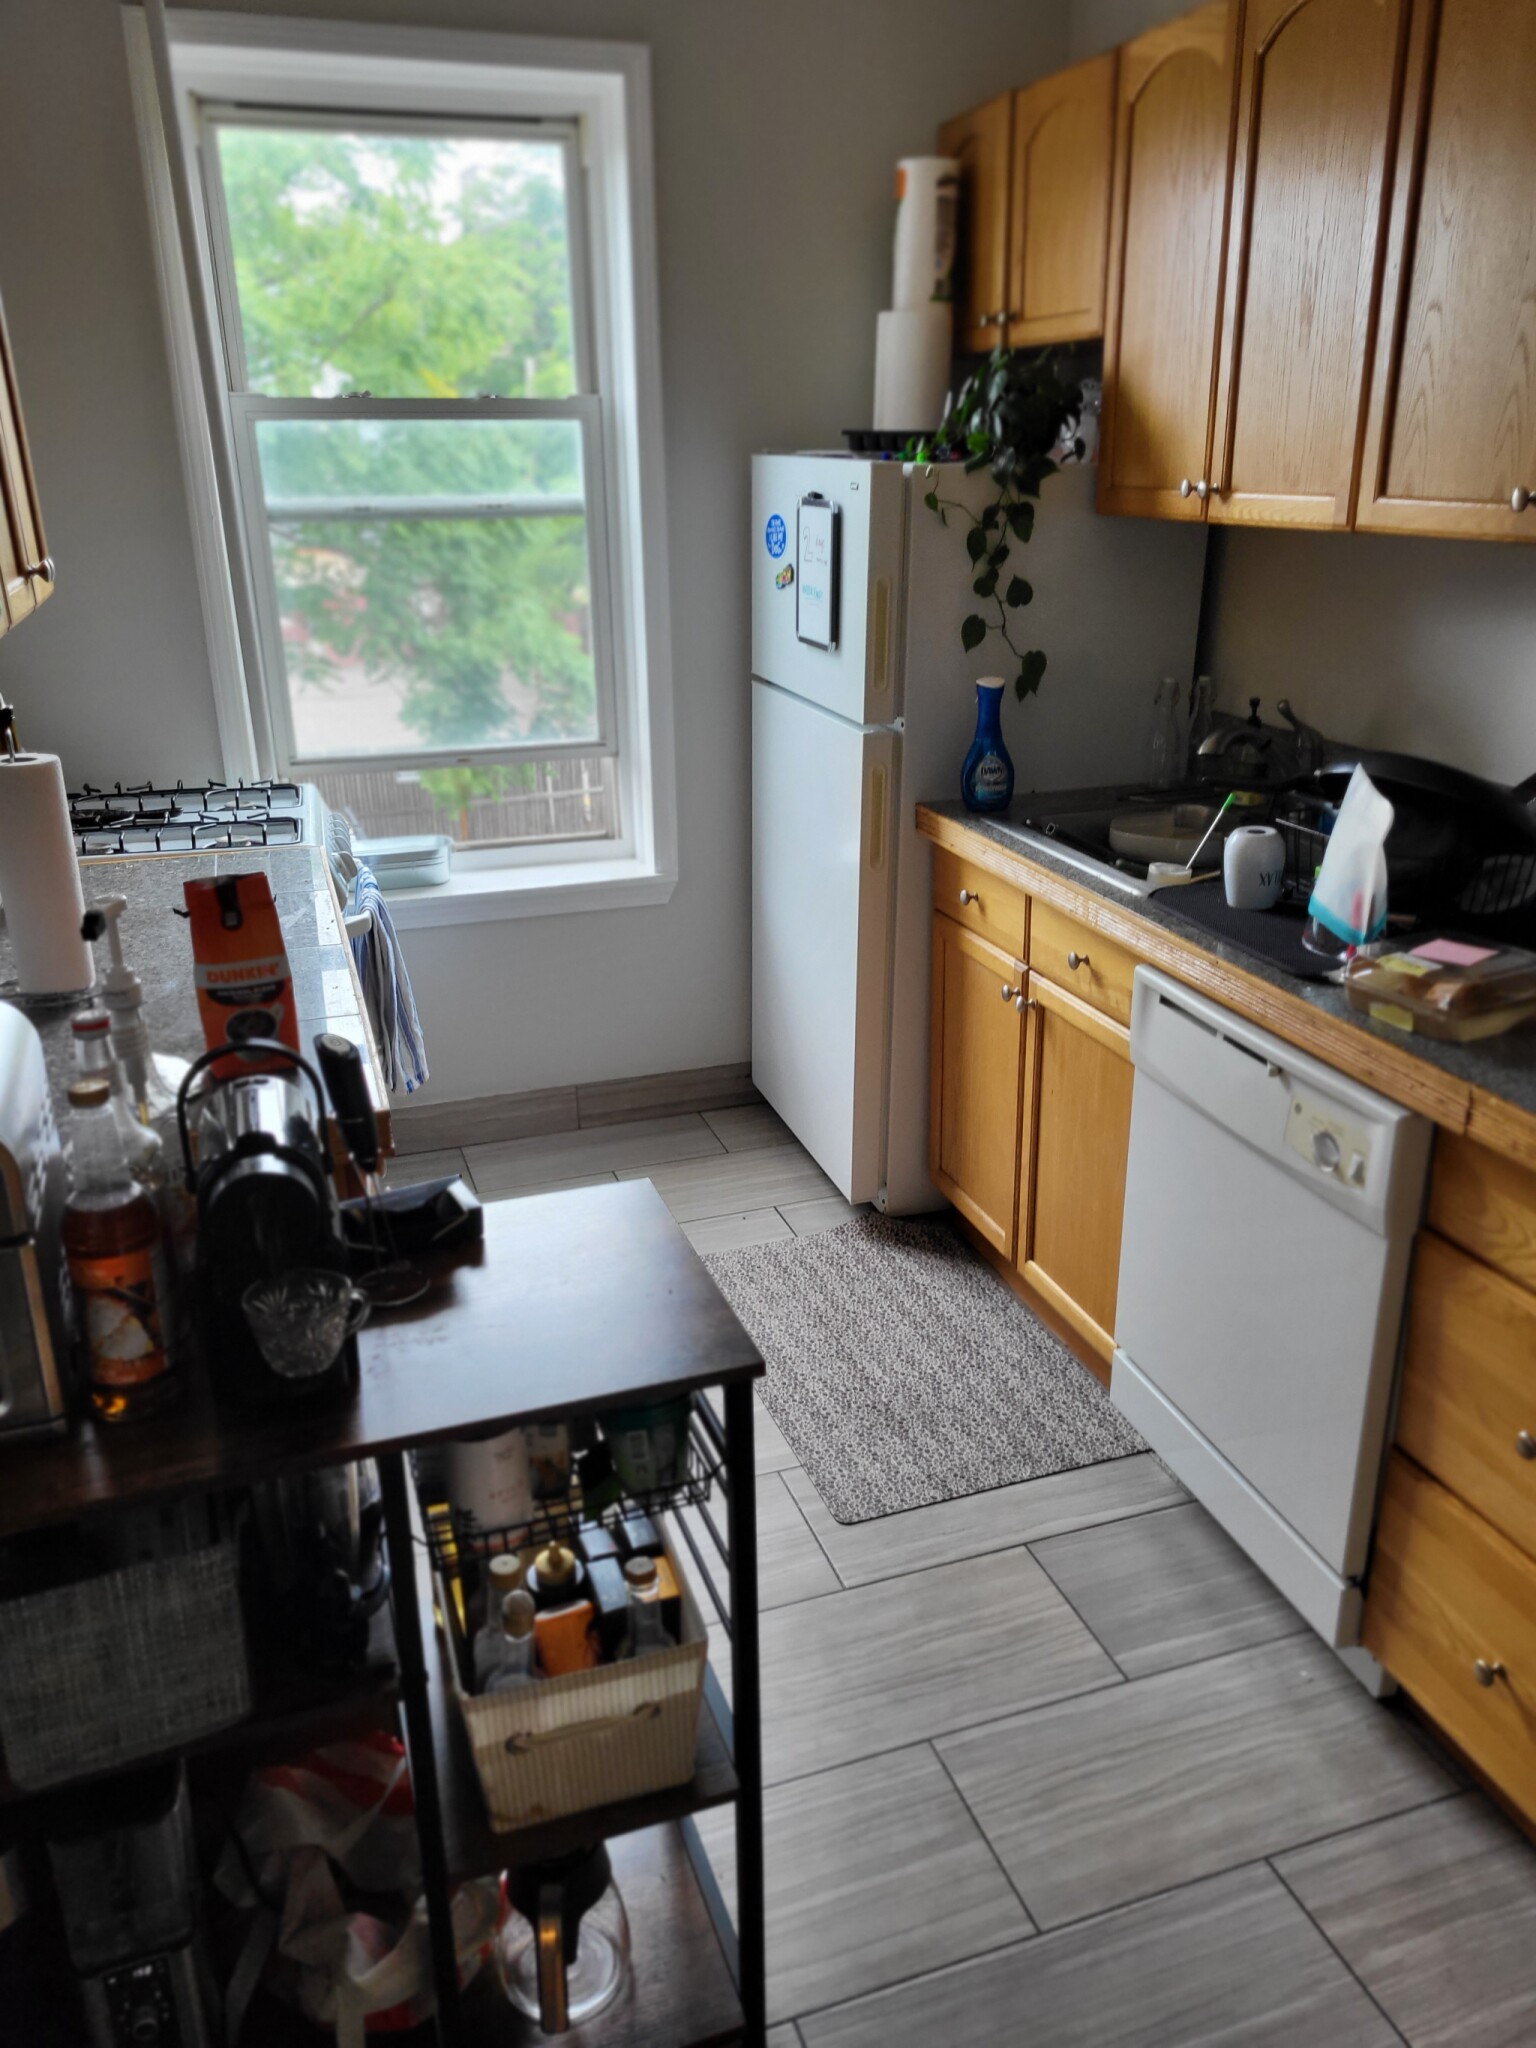 Photos of apartment on Mansfield St.,Boston MA 02134